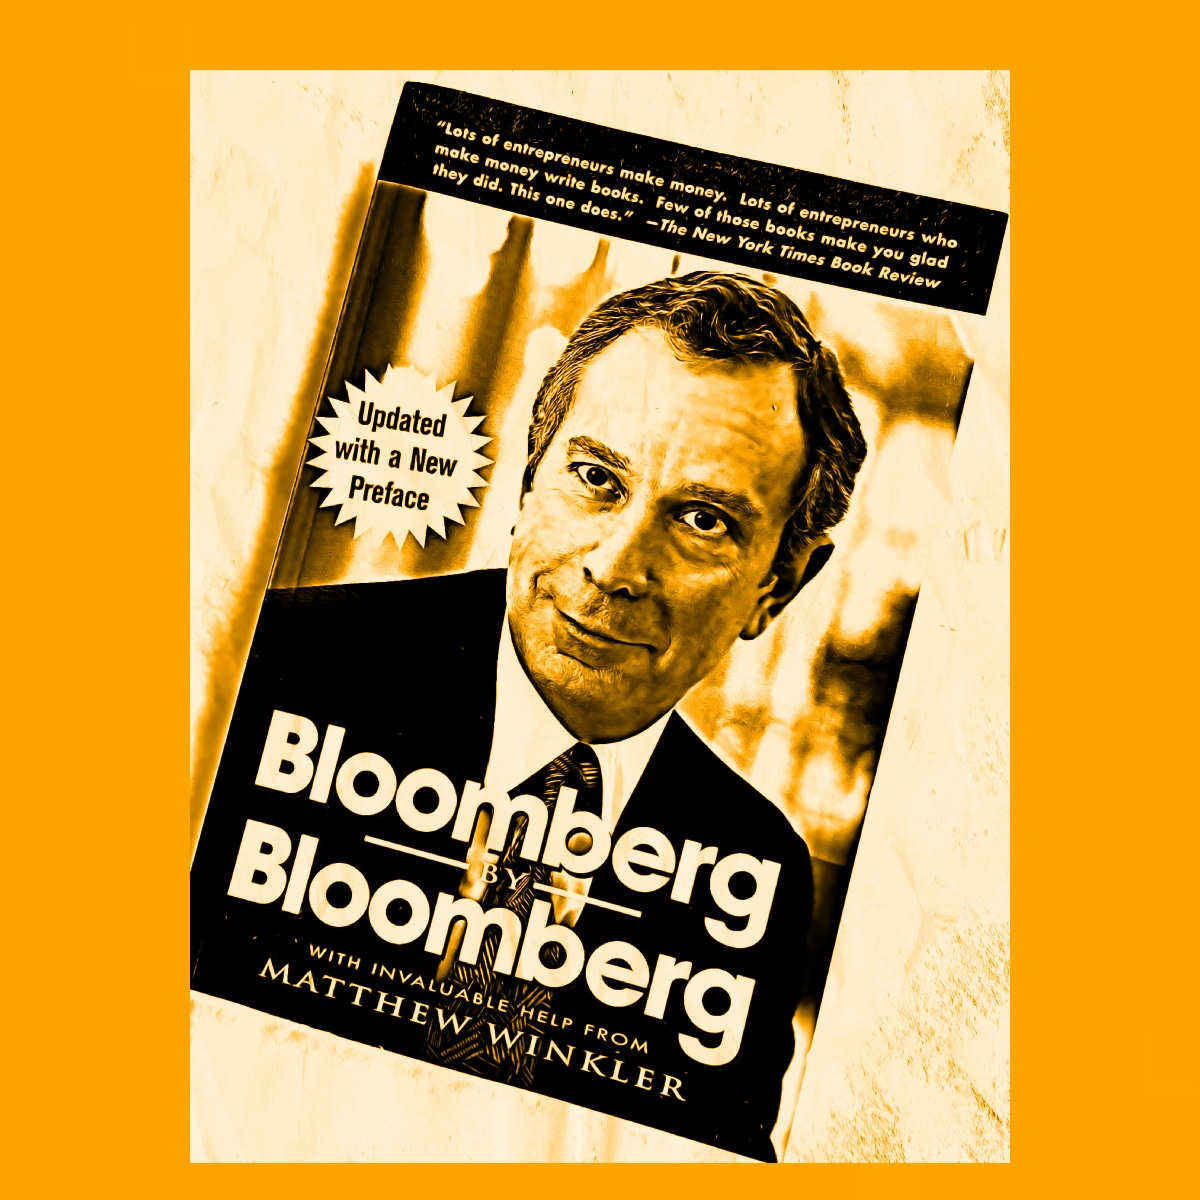 The cover of Bloomberg’s autobiography.